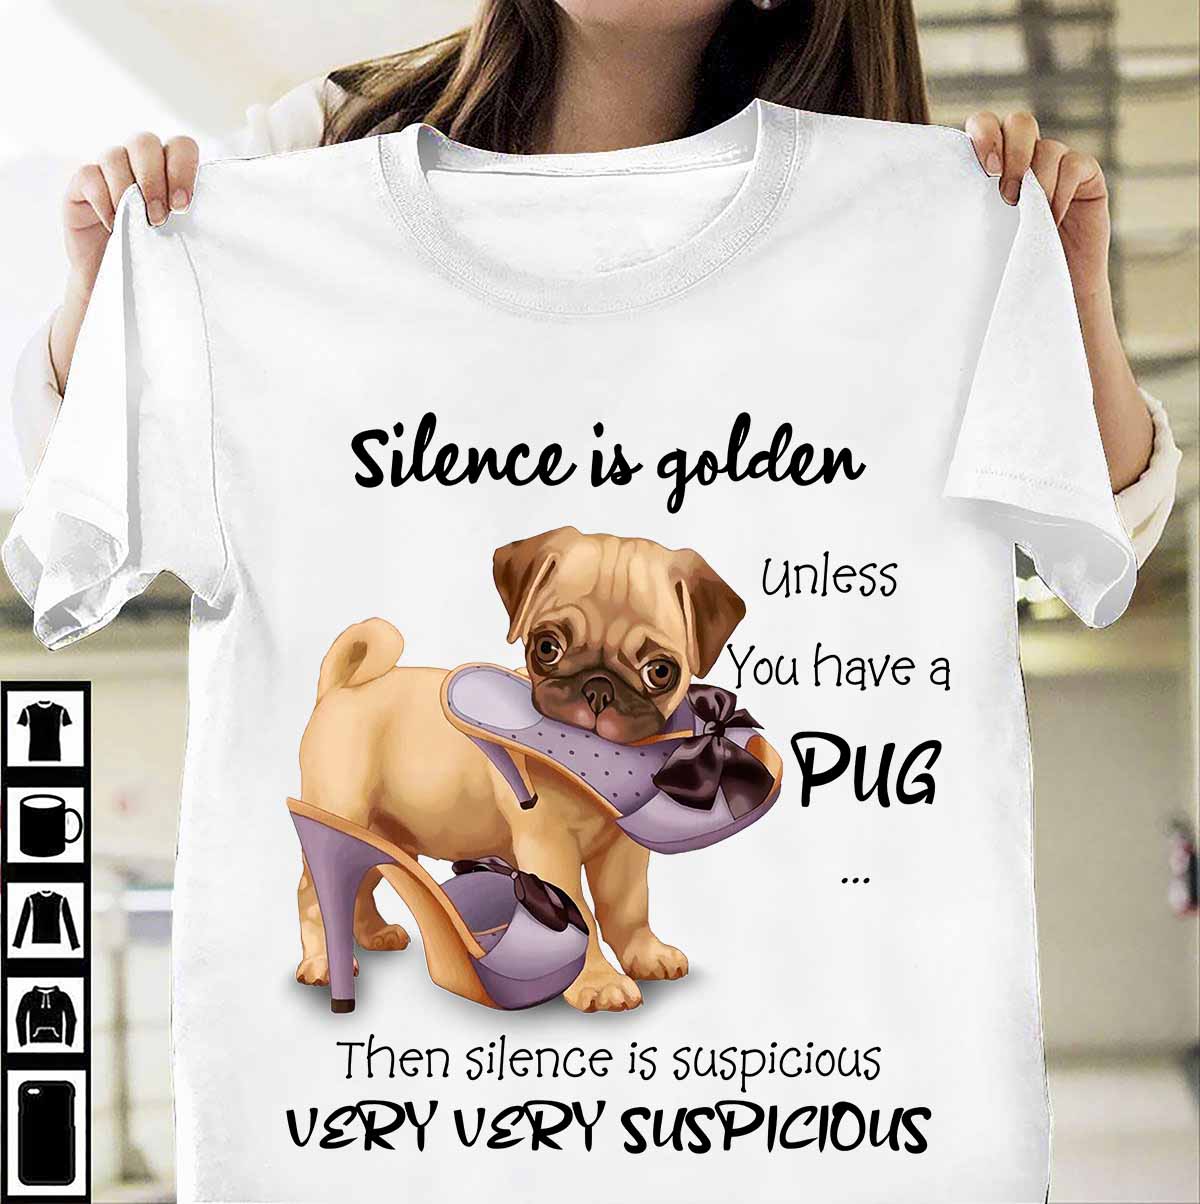 Silence is golden unless you have a pug then silence is suspicious